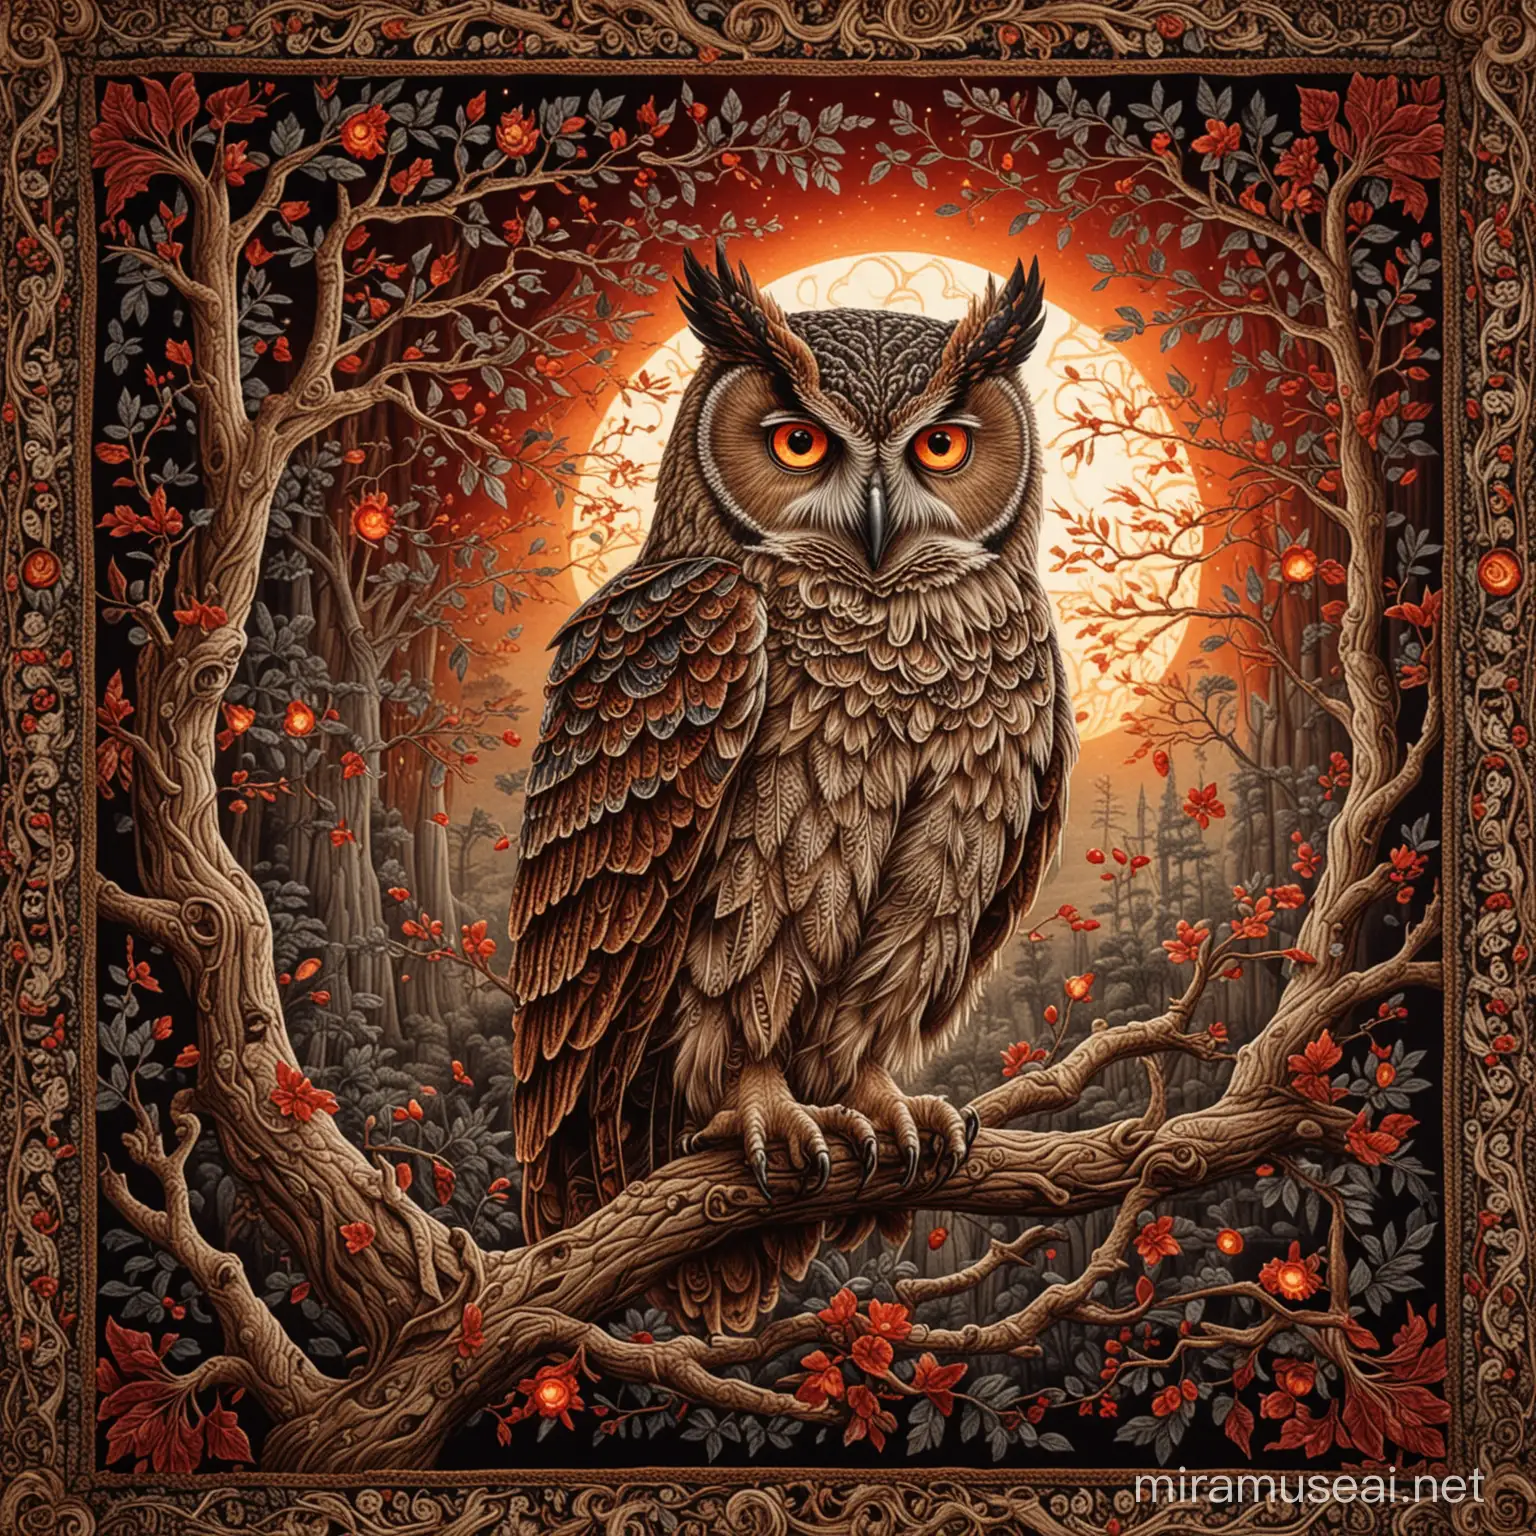 Intricate Mystical Owl Tapestry with Glowing Red Eyes